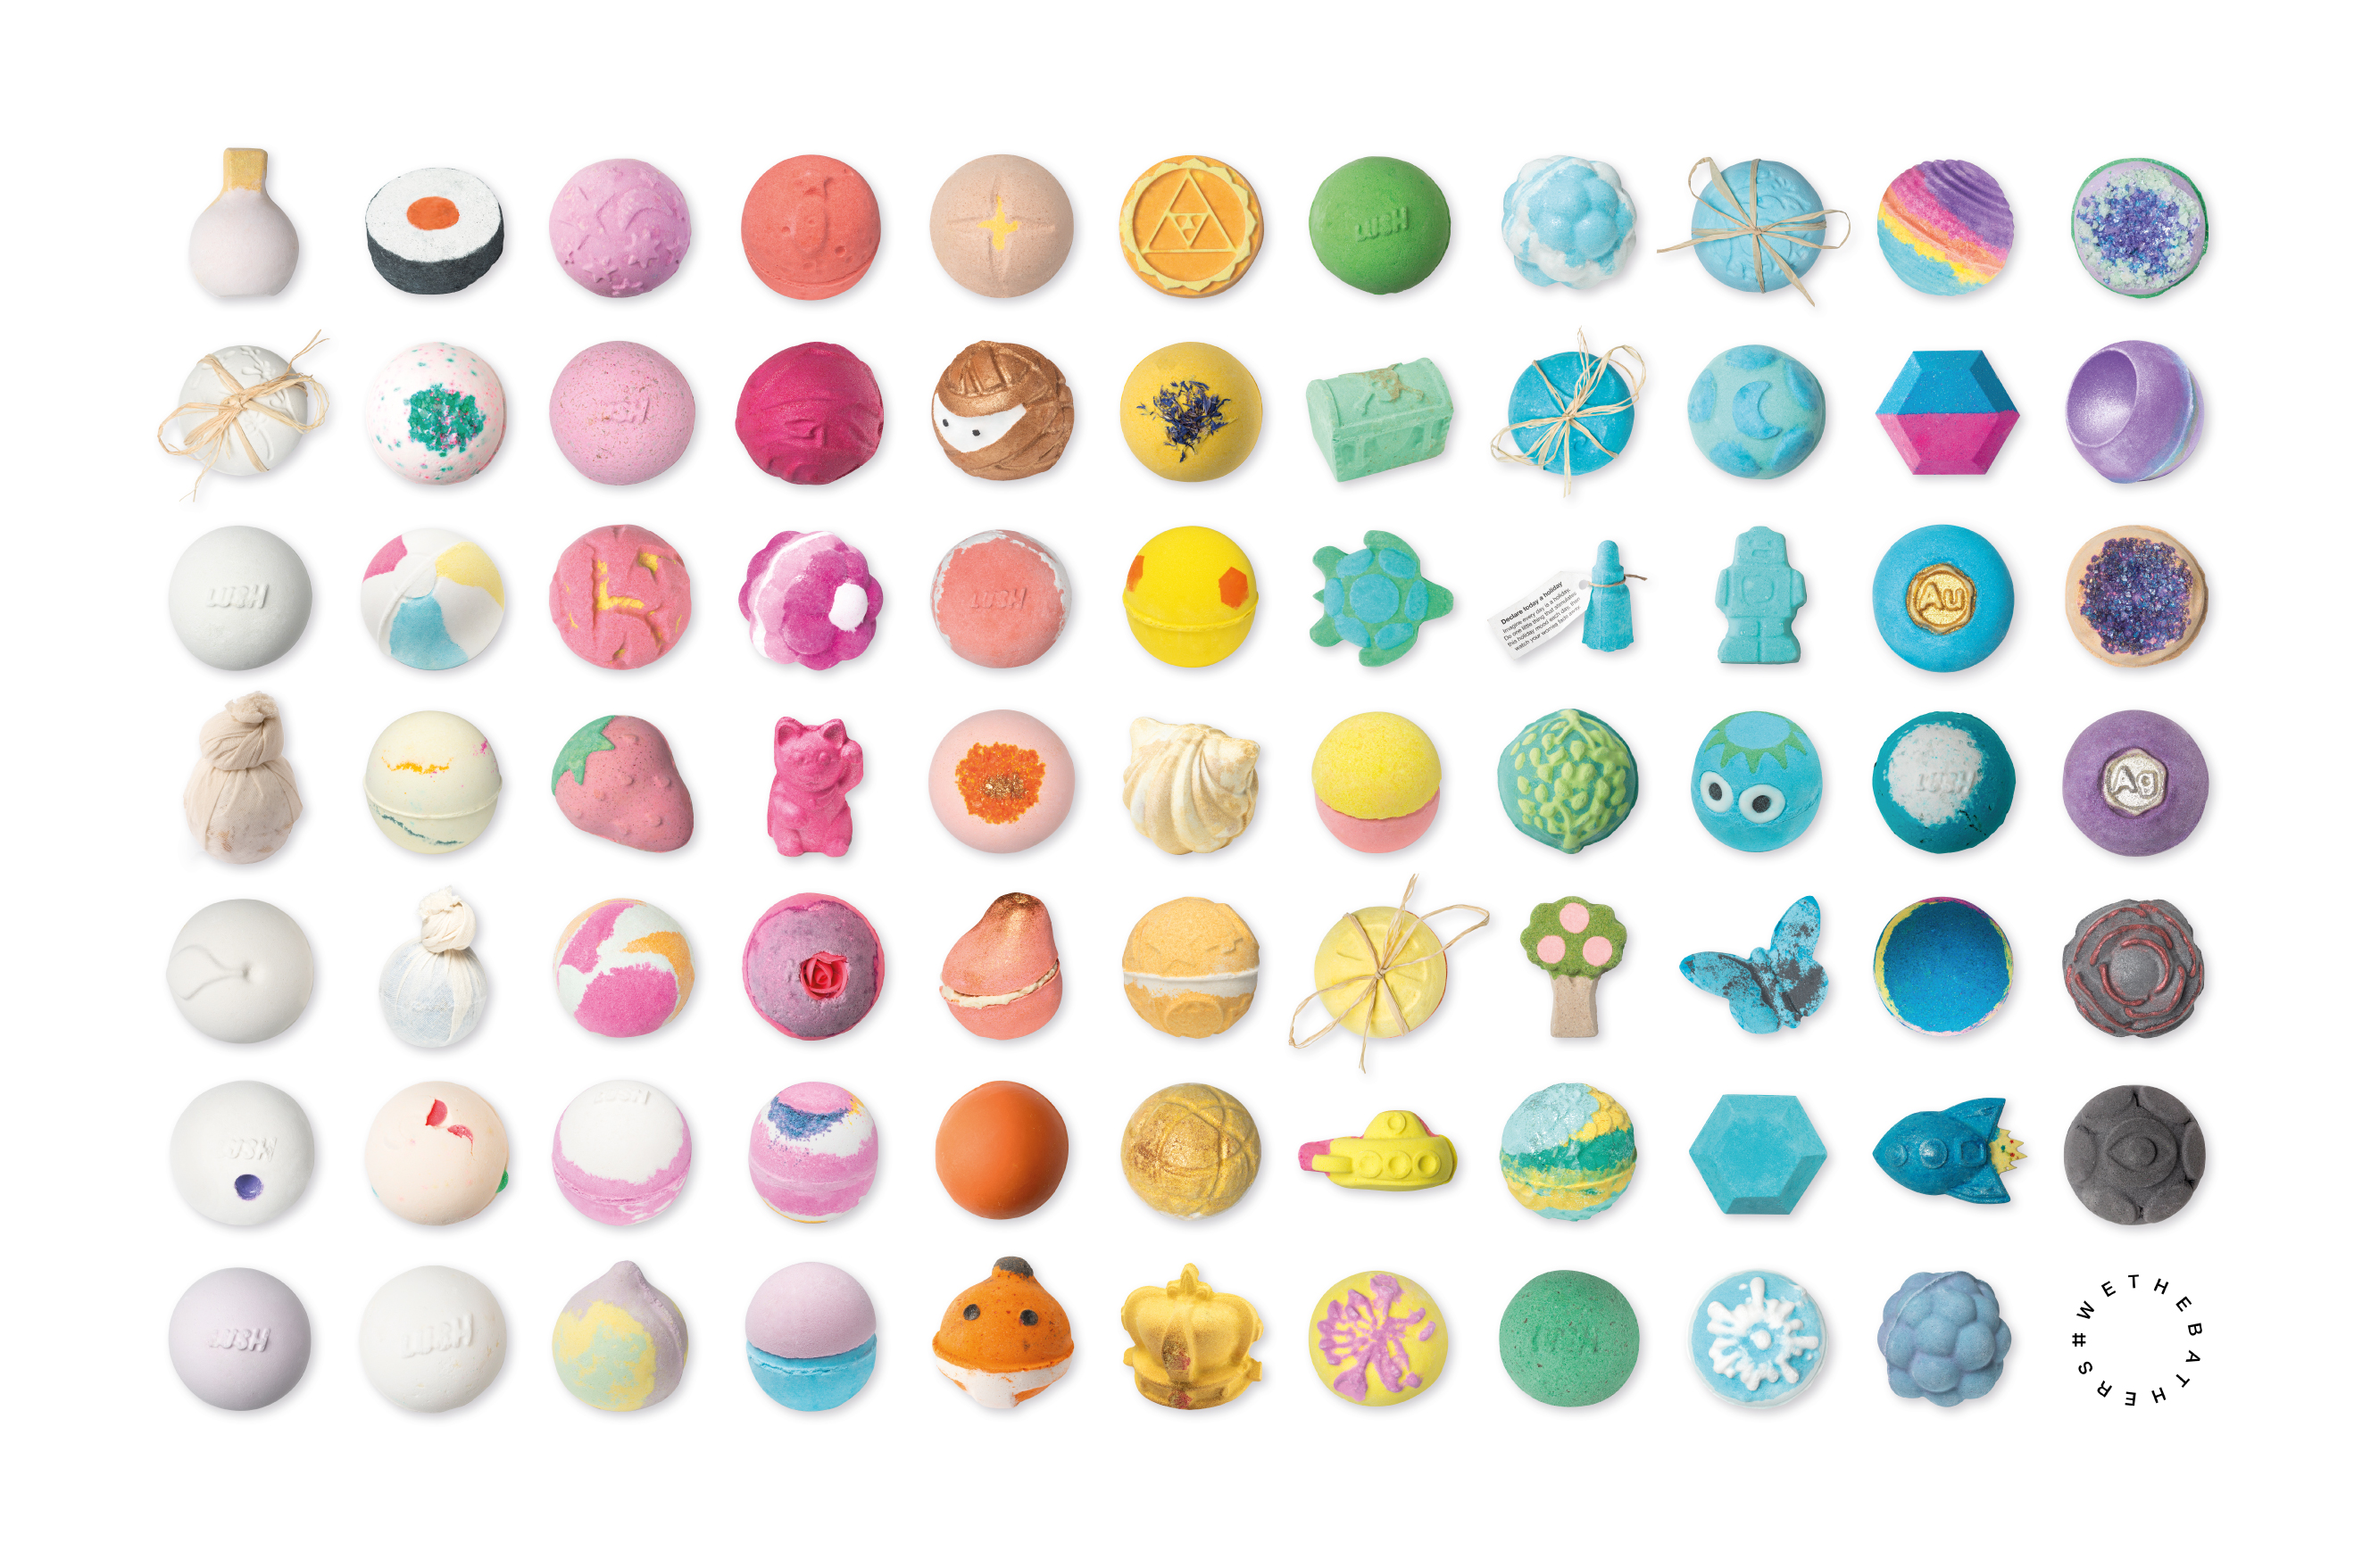 Lush Japan-exclusive bath bombs from 